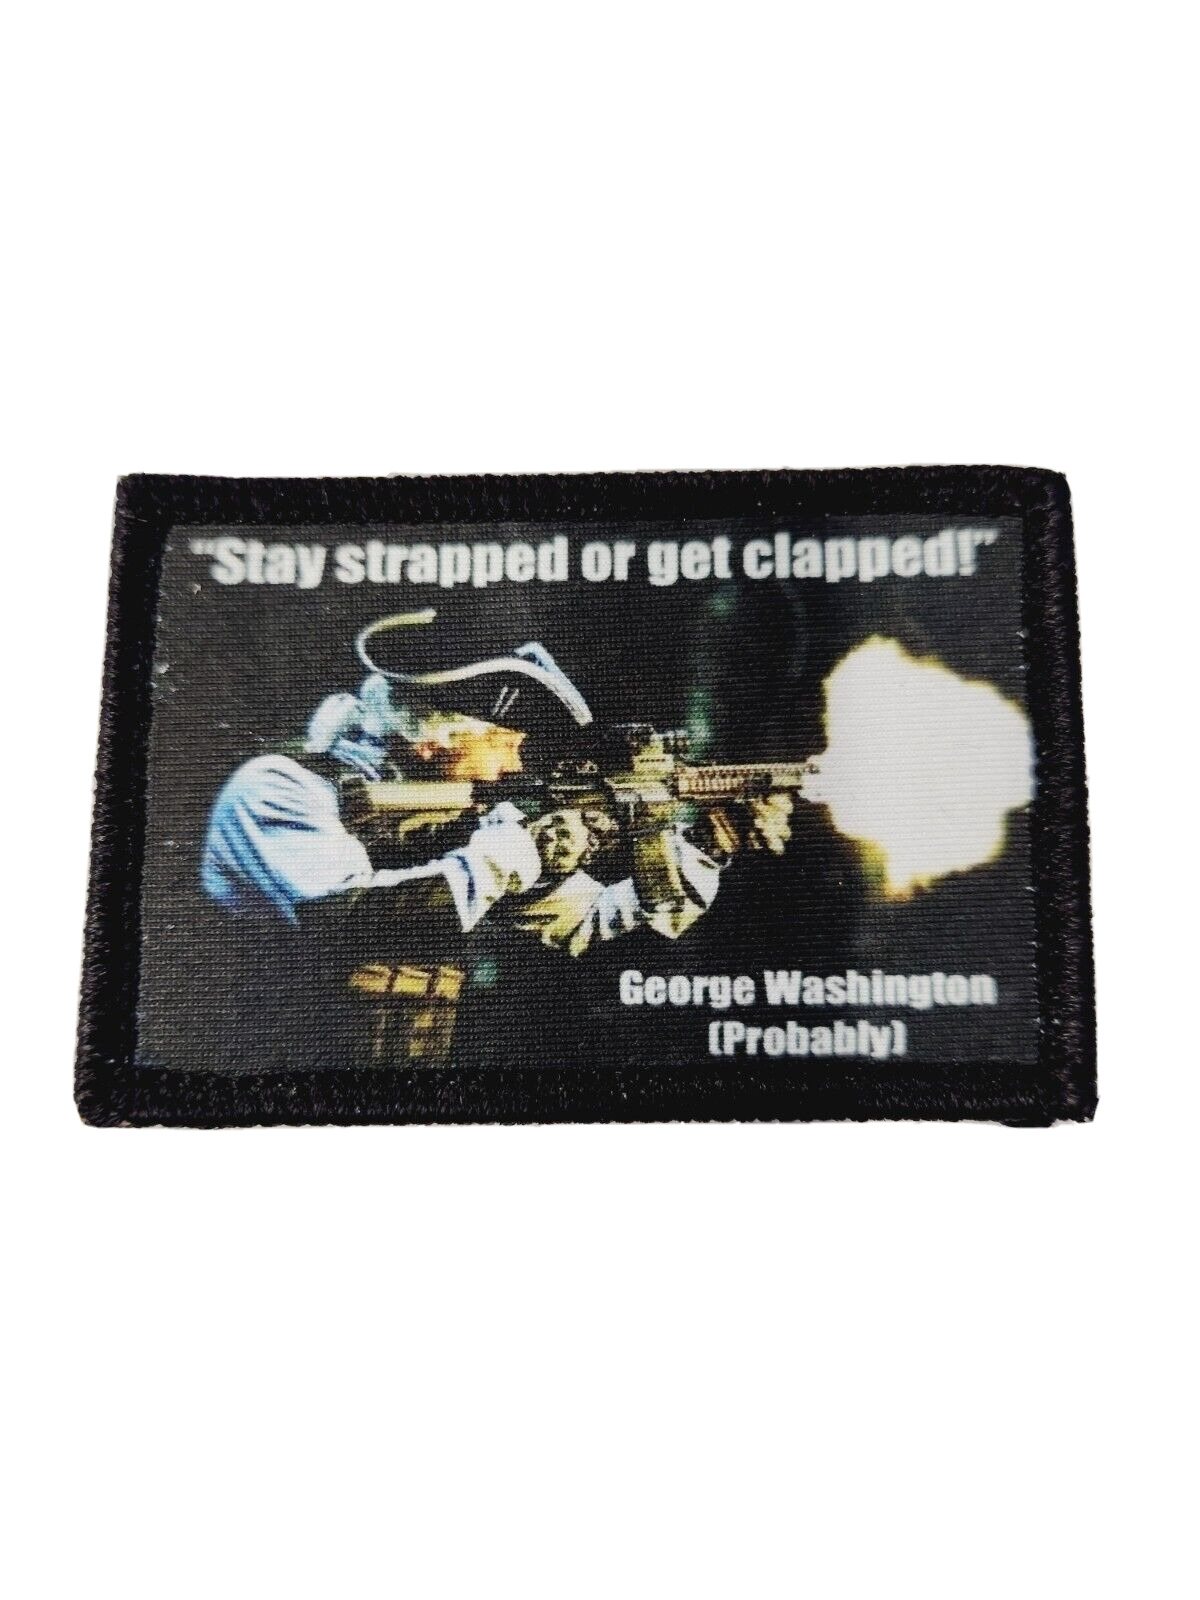 Stay Strapped or get clapped sublimation 2x3 Hat Patch Hook Backing